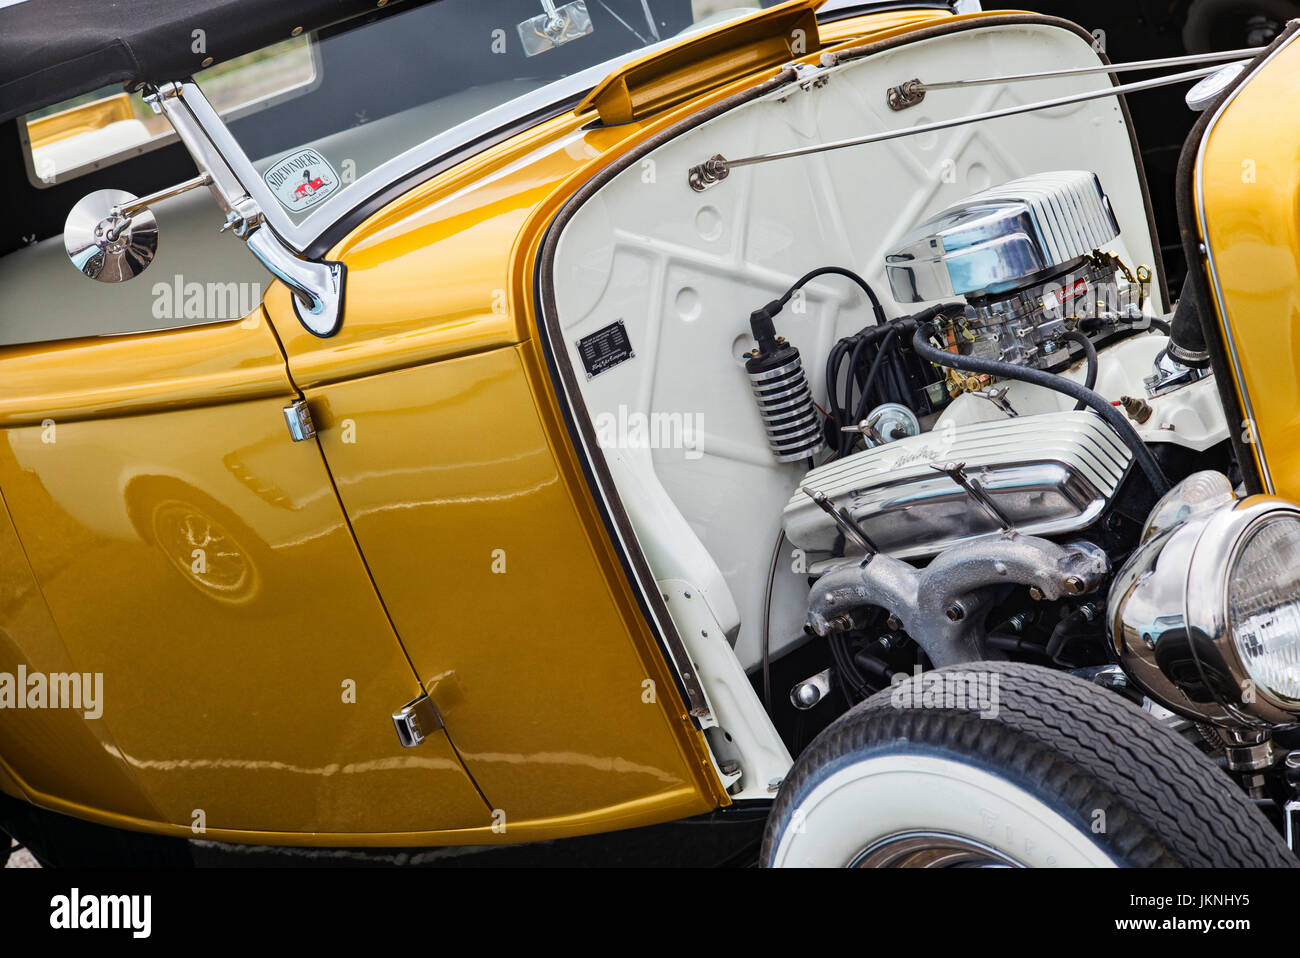 1932 Ford Roadster at an American car show. Essex, England. Classic vintage American custom car Stock Photo